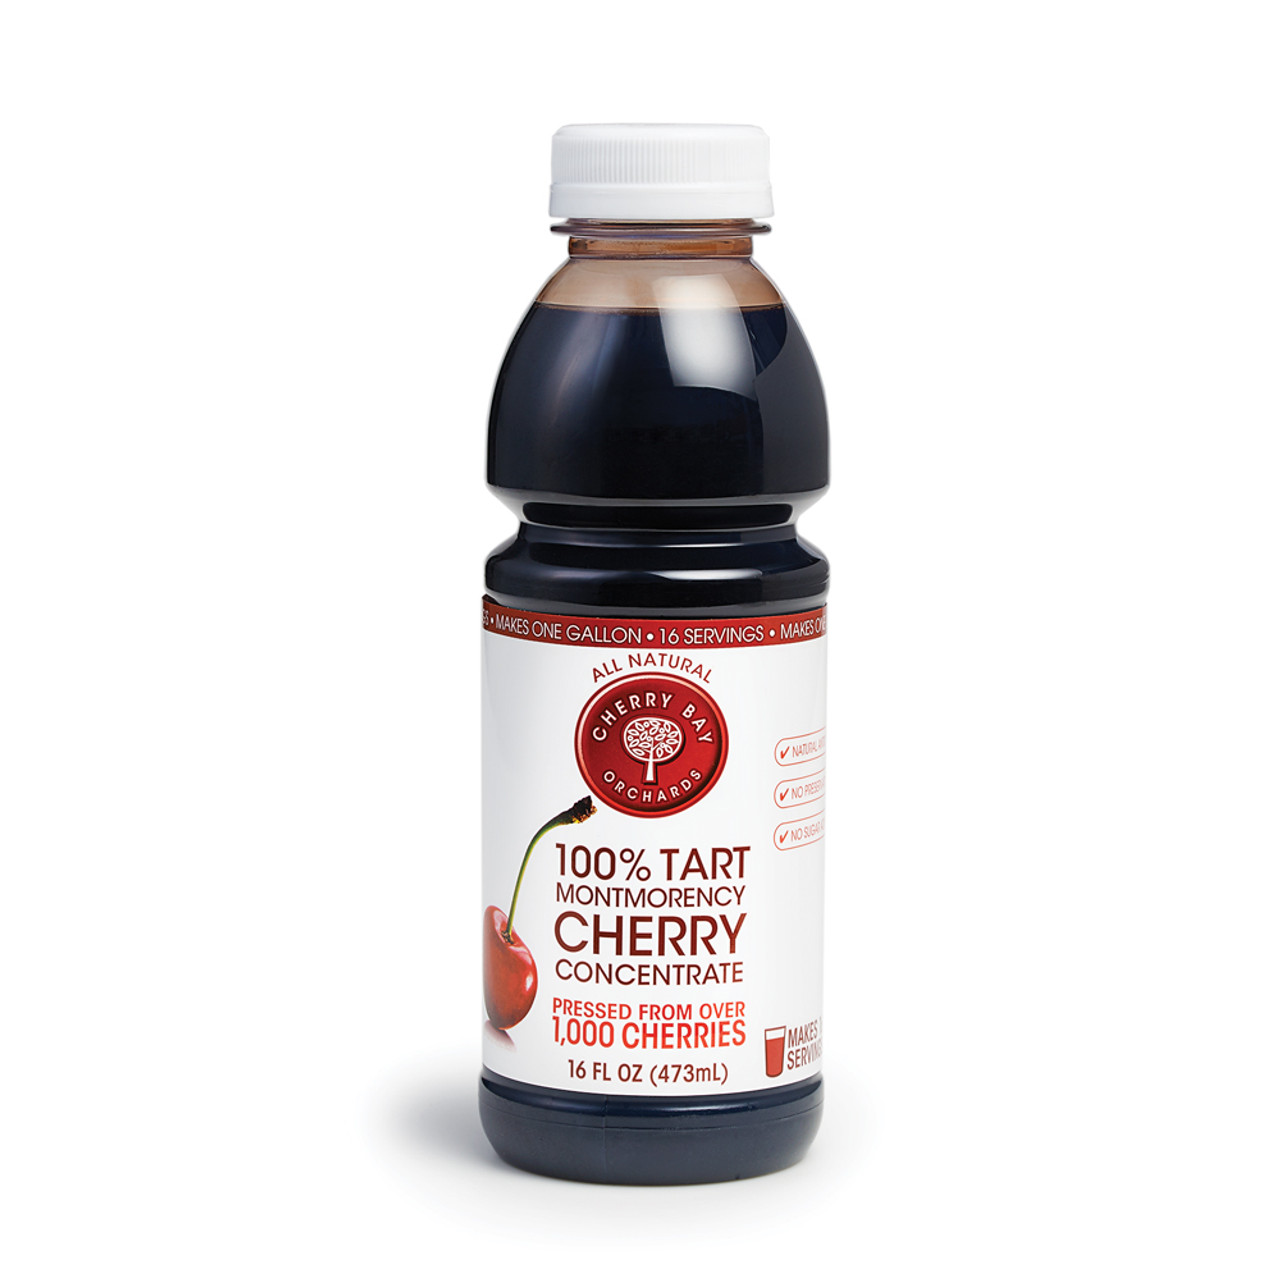 Tart cherry juice concentrate